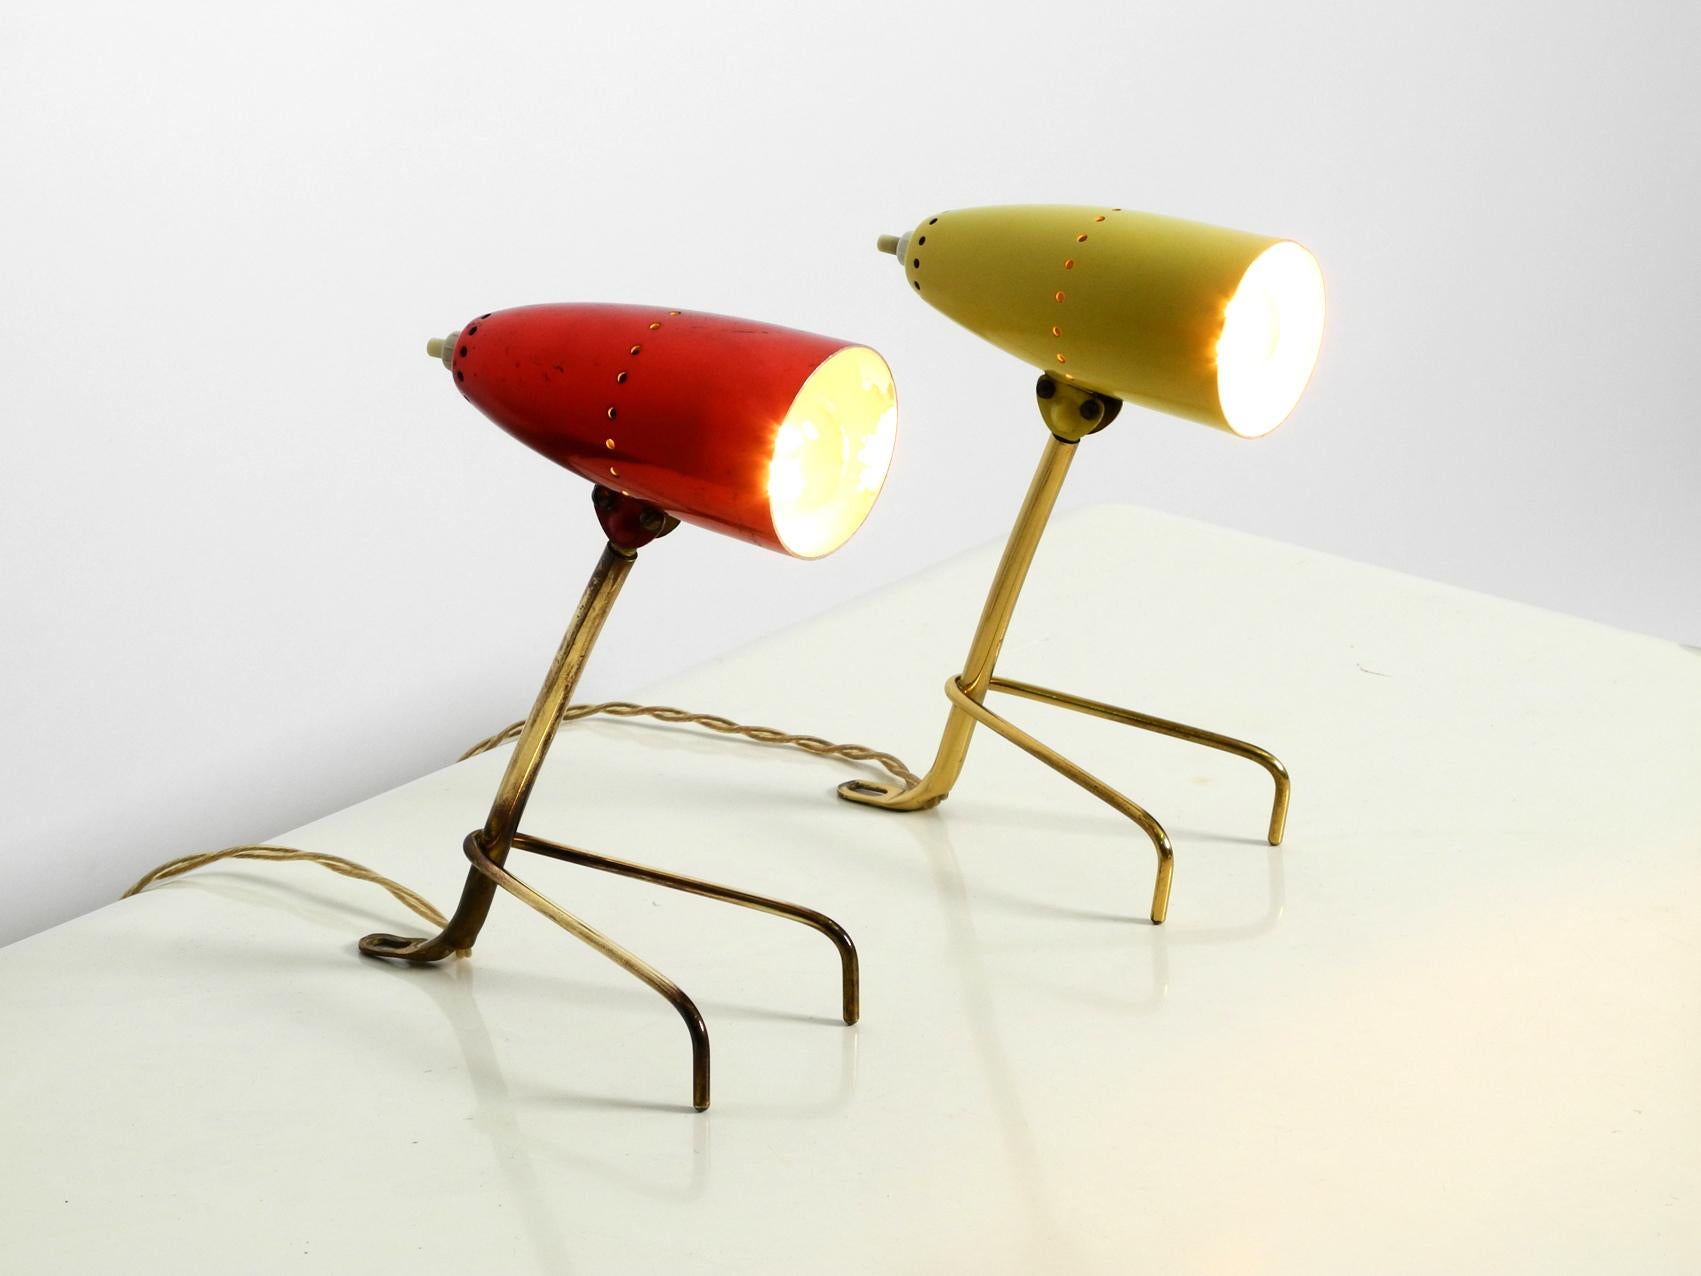 Stunning Pair of Mid-Century Modern Brass Crowfoot Table Lamps, Made in Austria 6